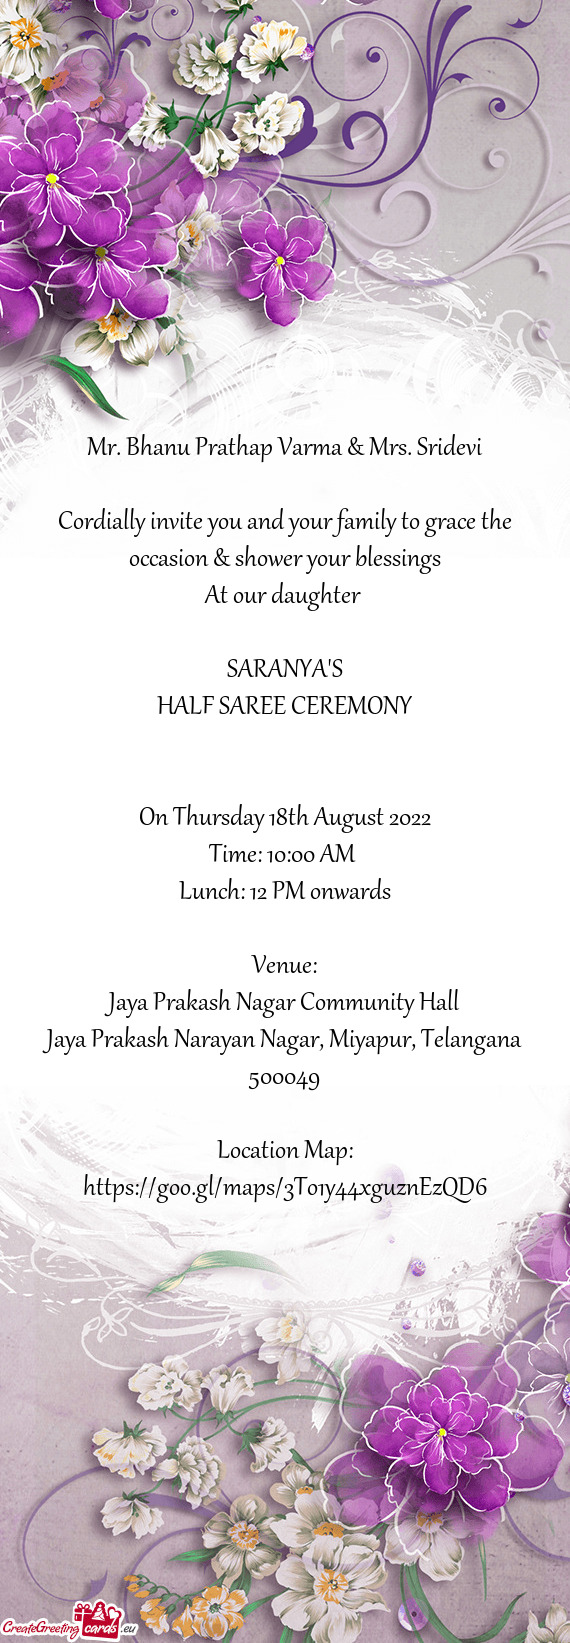 Cordially invite you and your family to grace the occasion & shower your blessings